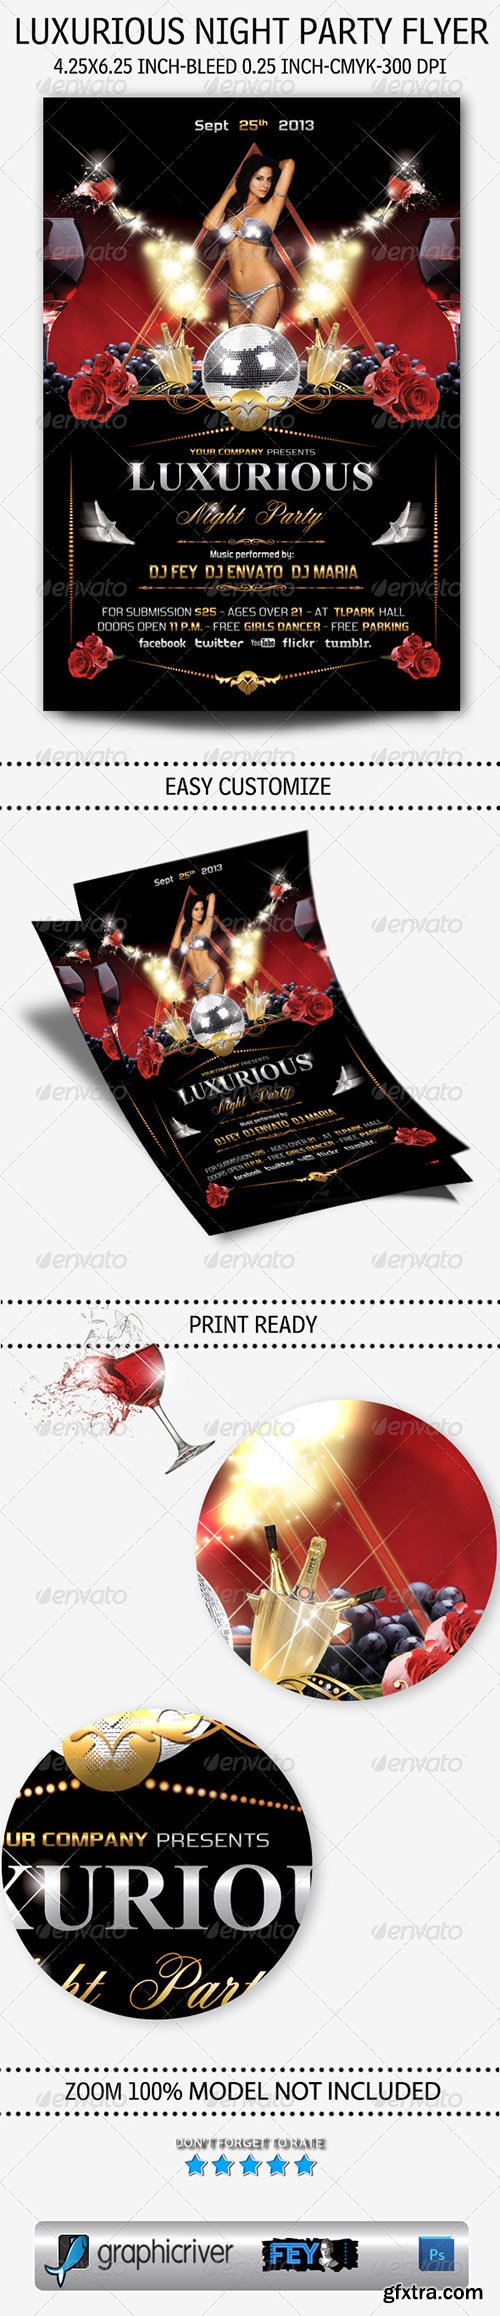 Graphicriver Luxurious Night Party Flyer 5483436